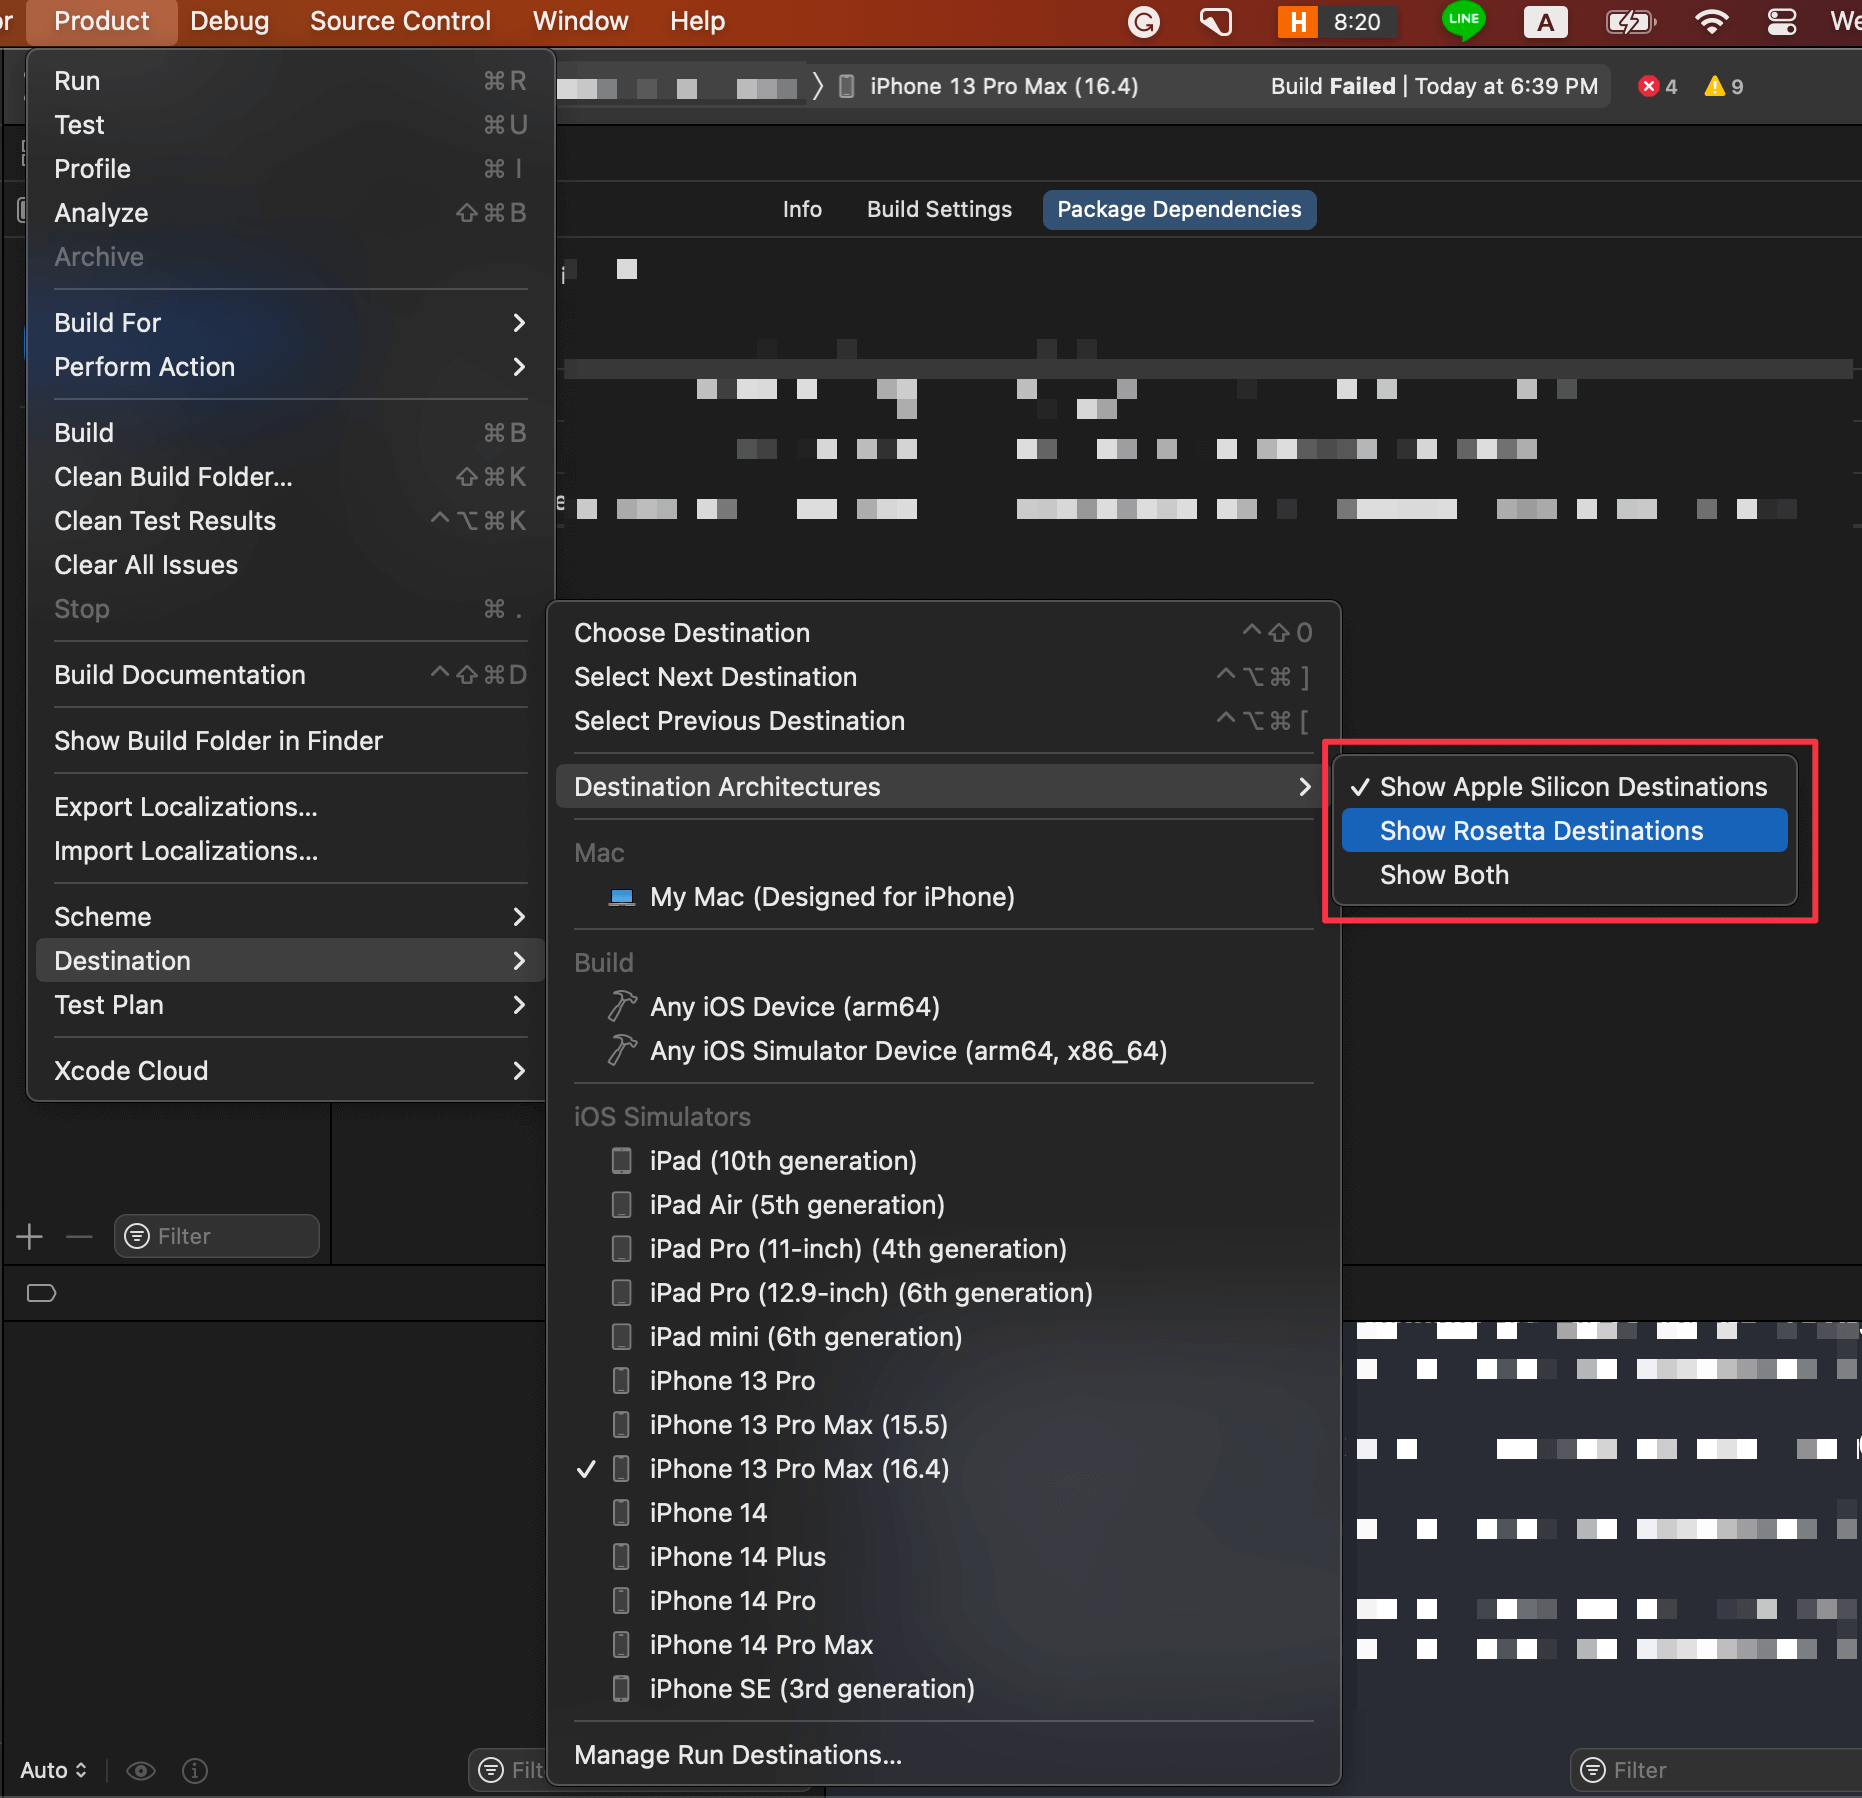 Go to "Product" in the menu bar and select Destination > Destination Architectures > Show Rosetta Destinations.